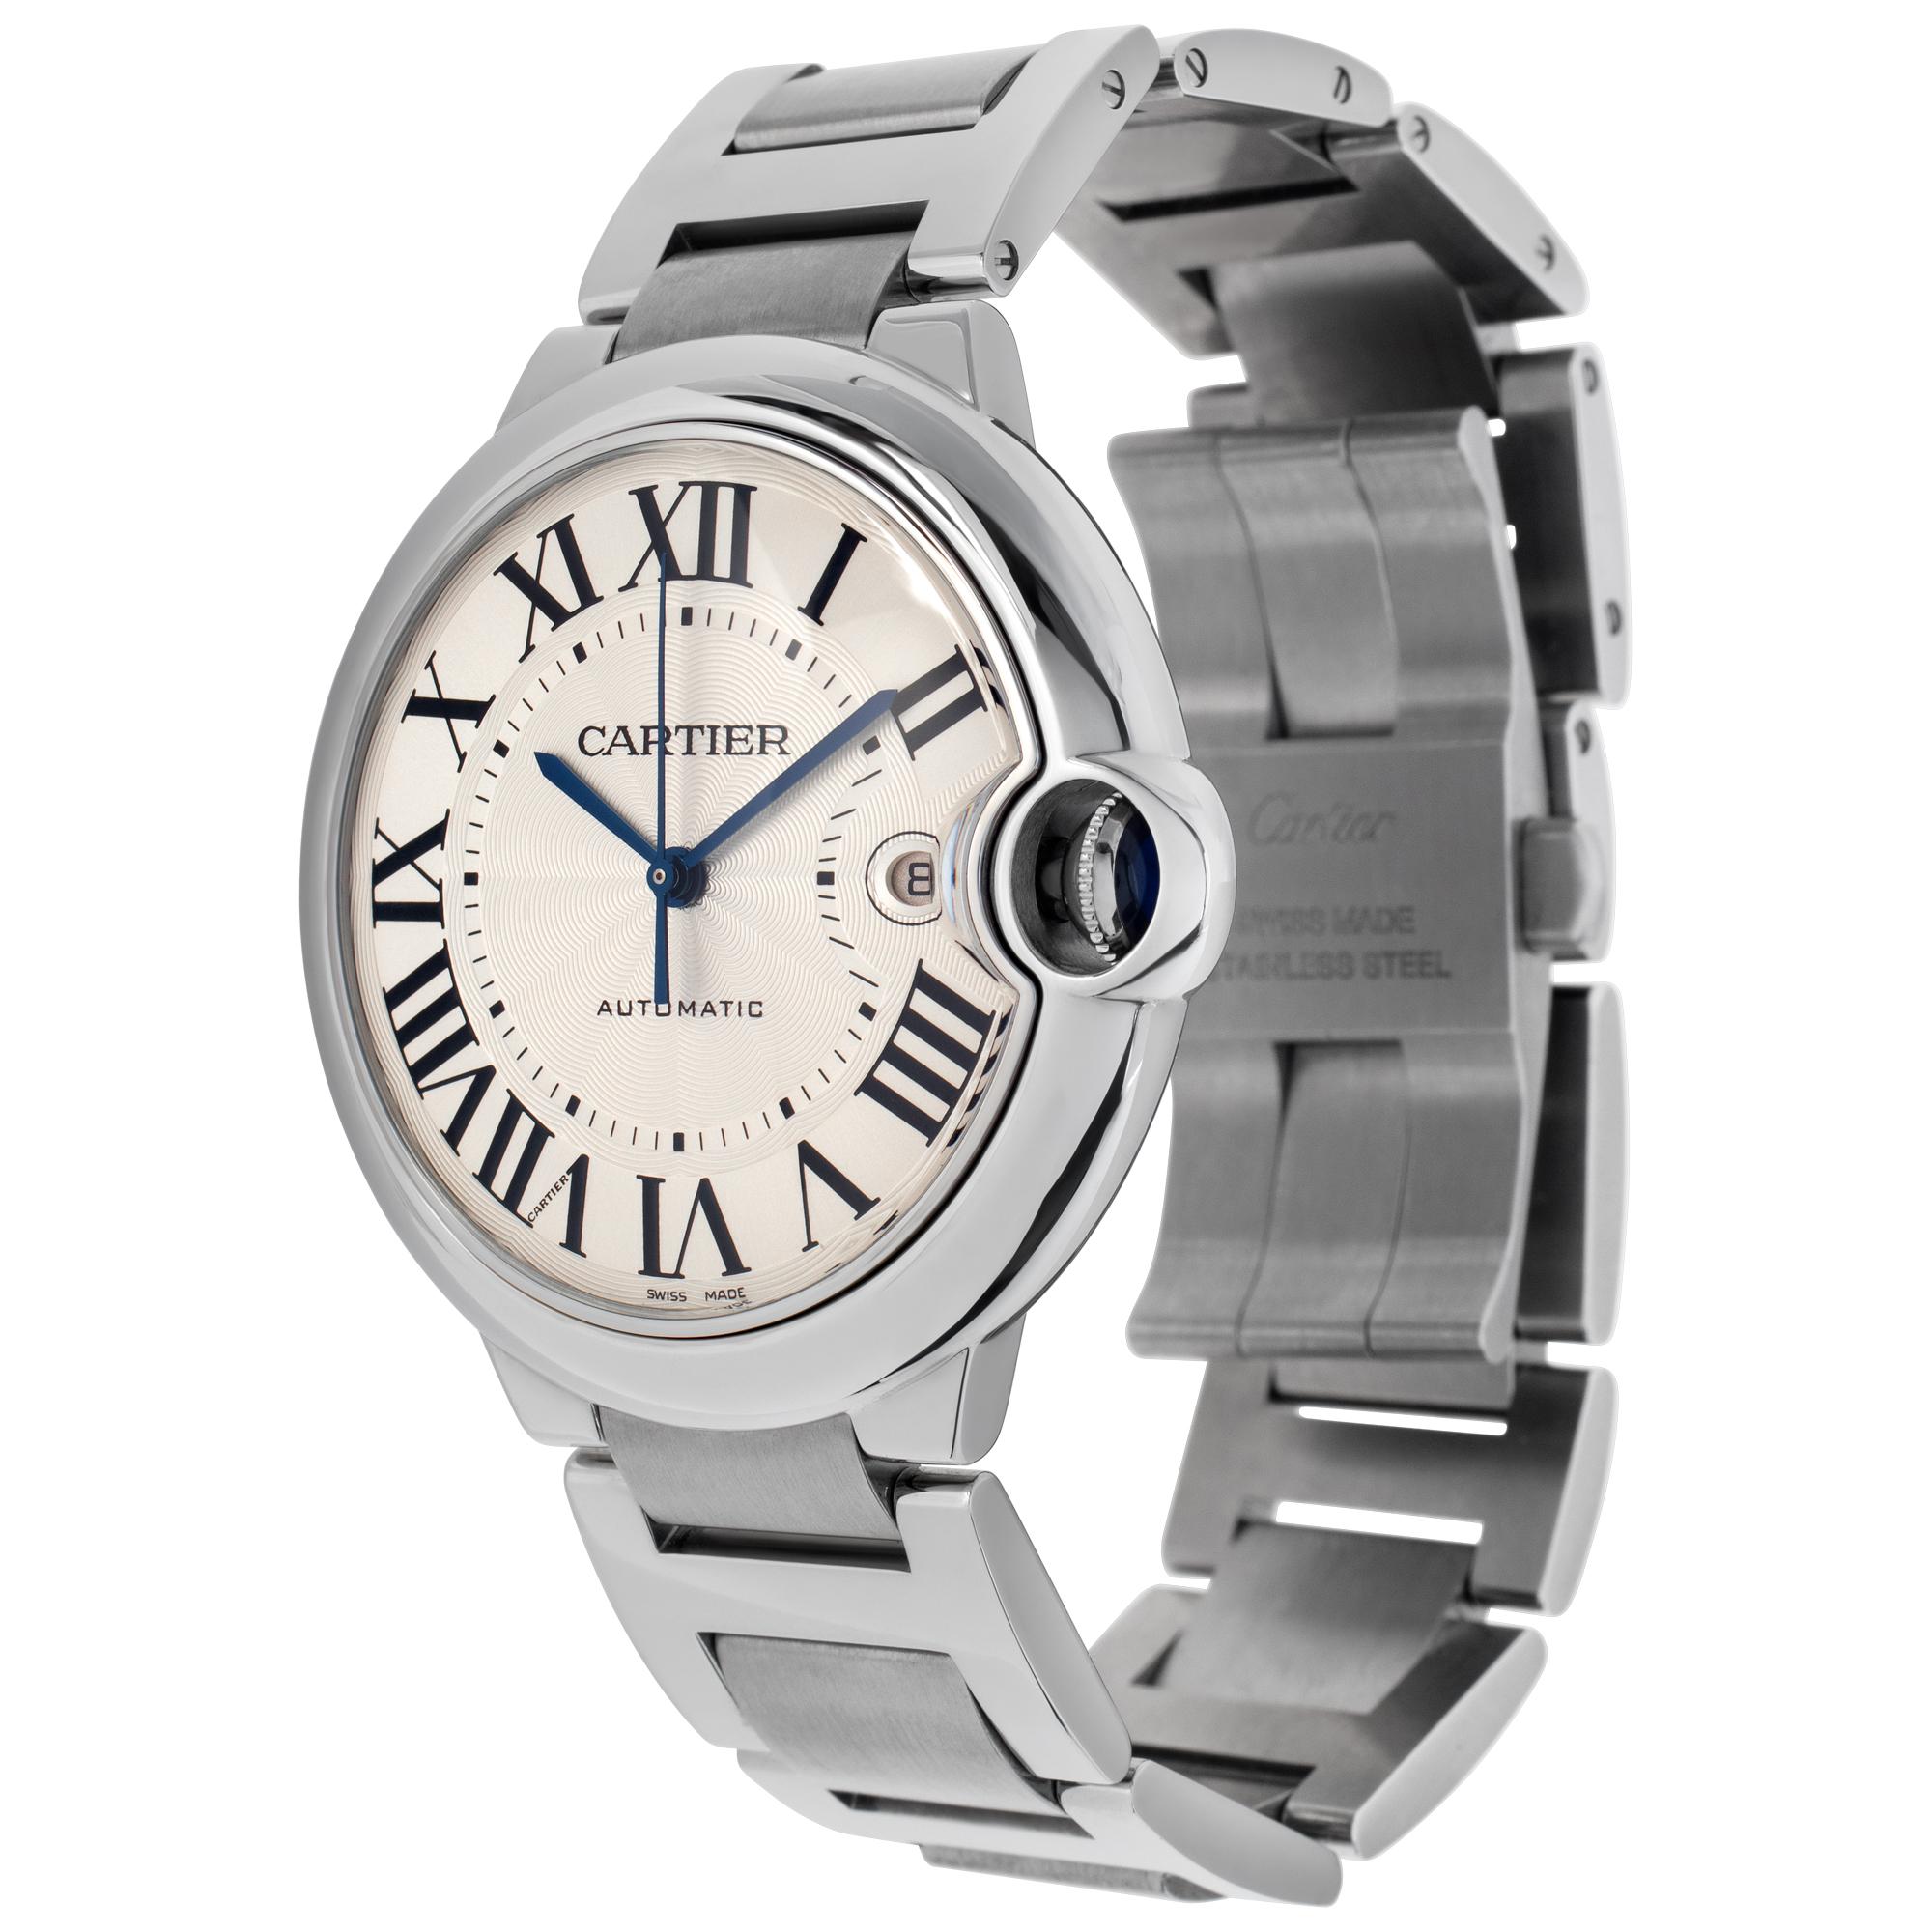 Cartier Ballon Bleu in stainless steel. Auto w/ sweep seconds and date. 42 mm case size. Ref W69012Z4. Circa 2010s. Fine Pre-owned Cartier Watch. Certified preowned Classic Cartier Ballon Bleu W69012Z4 watch is made out of Stainless steel on a